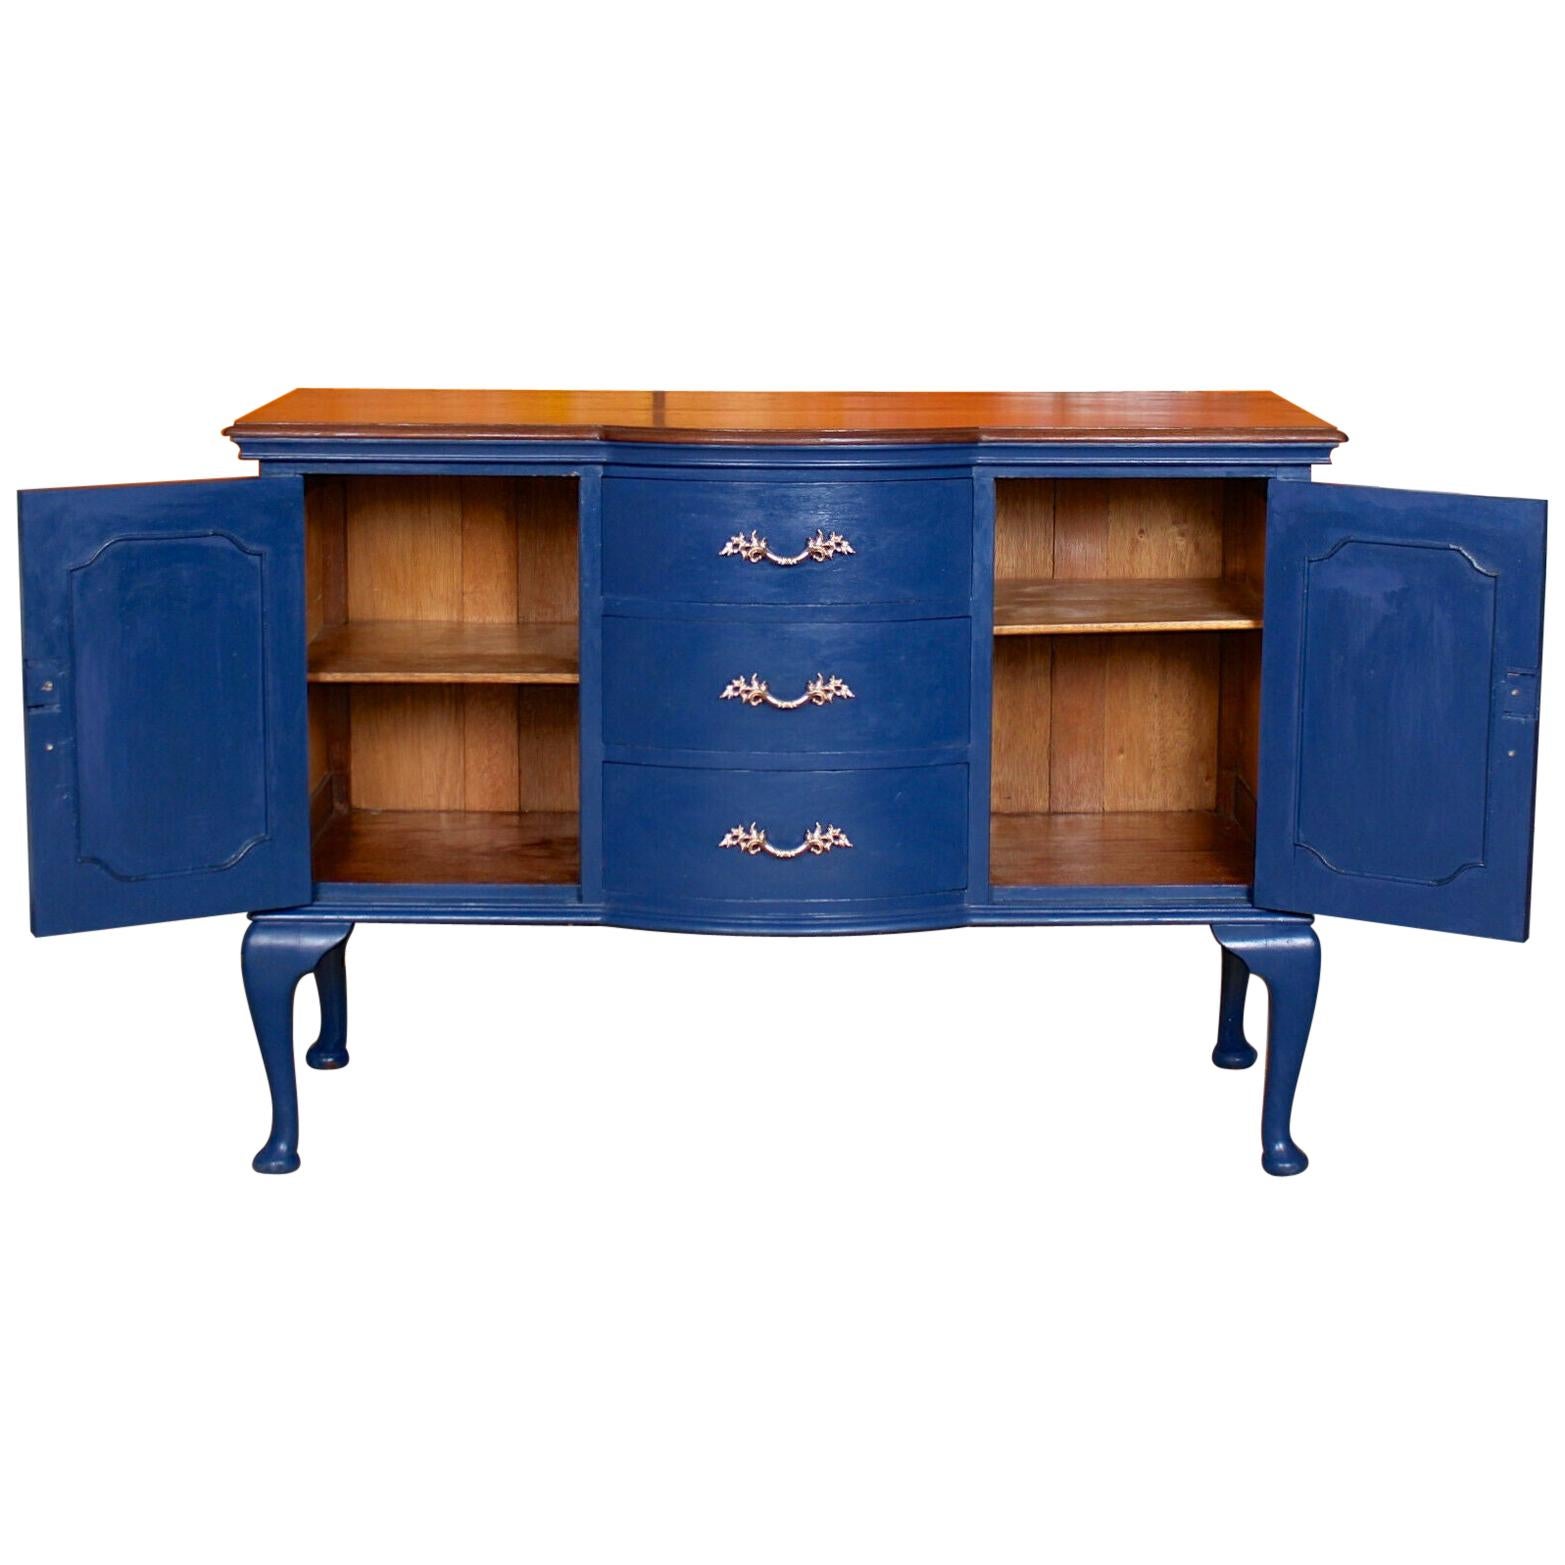 English Edwardian Sideboard Blue Painted Credenza For Sale